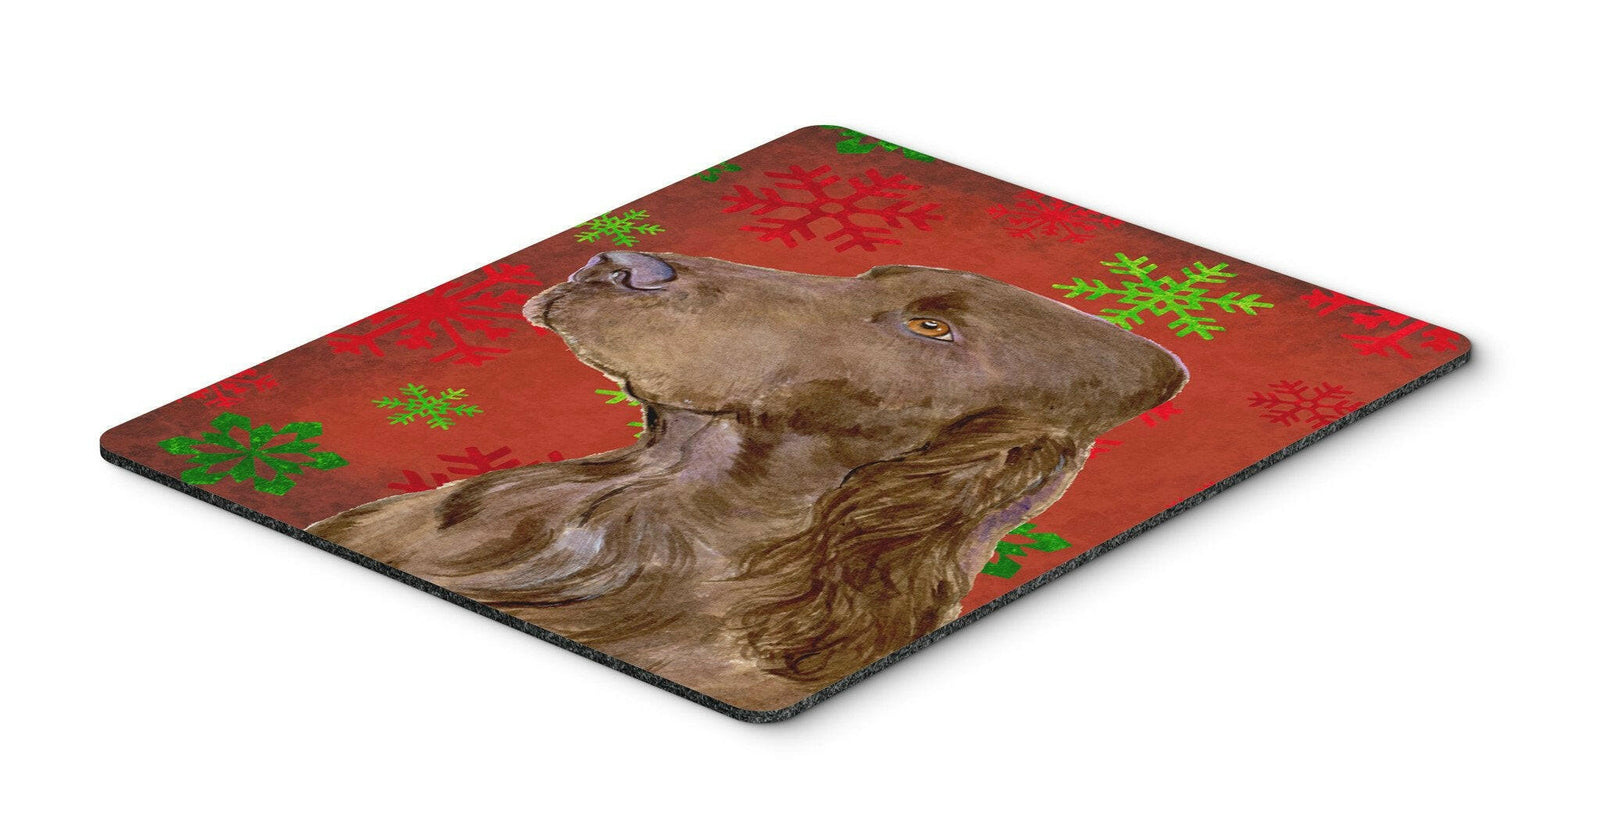 Field Spaniel Red and Green Snowflakes Christmas Mouse Pad, Hot Pad or Trivet by Caroline's Treasures